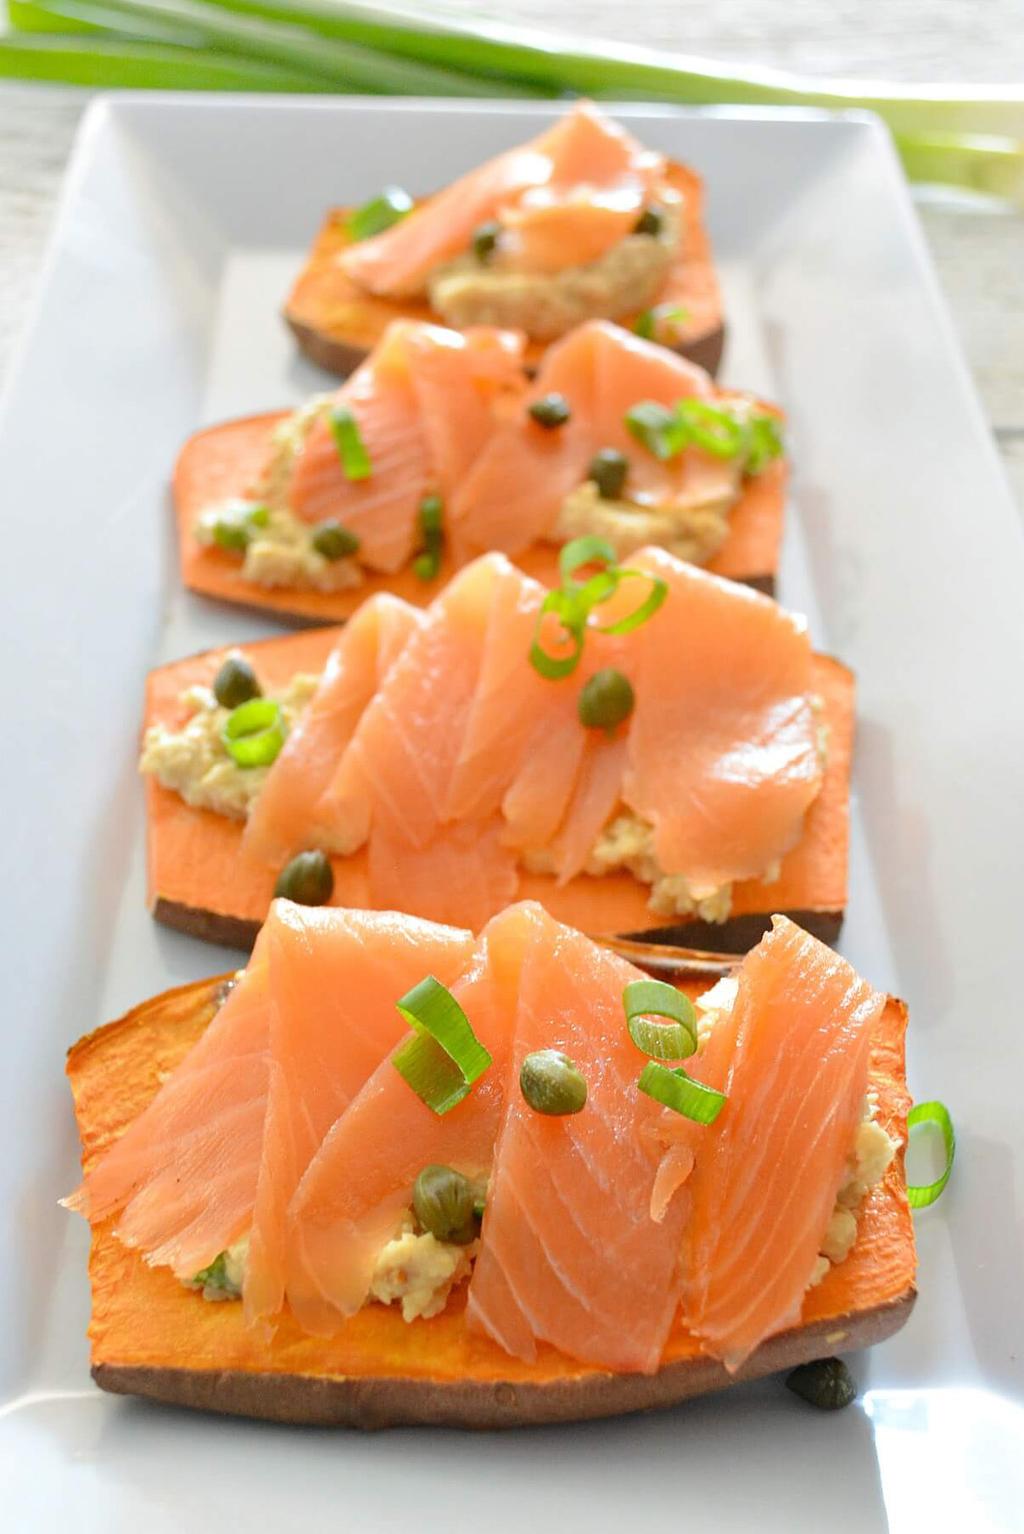 SALMON Caper Toast Prep Time: 10 minutes Cook Time: 5 minutes Serves: 4-8 1-2 sweet potatoes, ends cut off and sliced ¼-inch thick 3 oz smoked salmon, sliced into 1-inch strips 1 T capers ⅓ cup Paleo